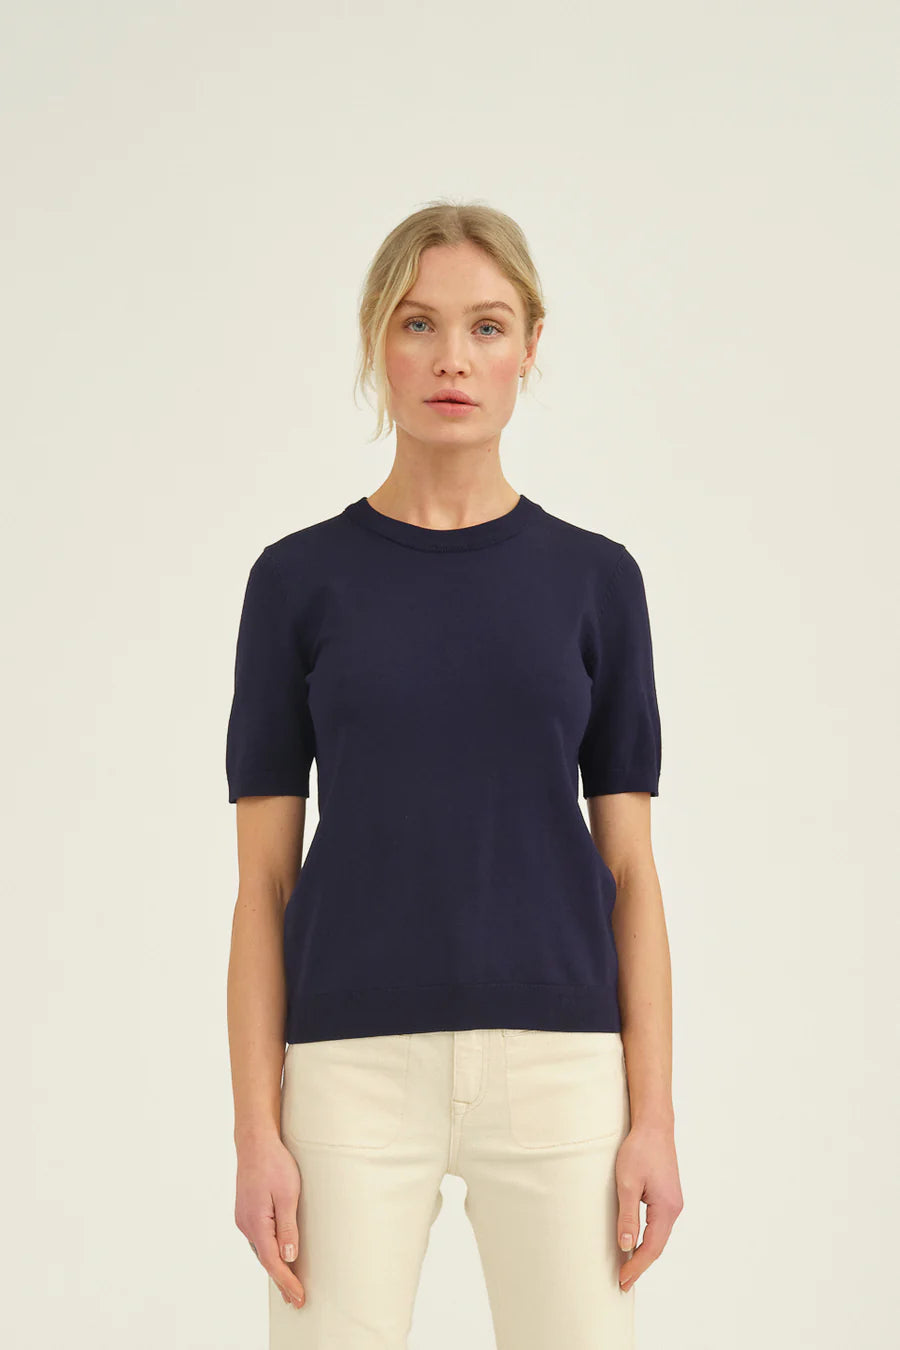 Eba Short sleeved Knit from our fabulous new brand Pieszac&nbsp;in a white knitted quality. Designed with short sleeves, O neckline and ribbing at hem. A great piece for transition into spring and for layering under jackets.